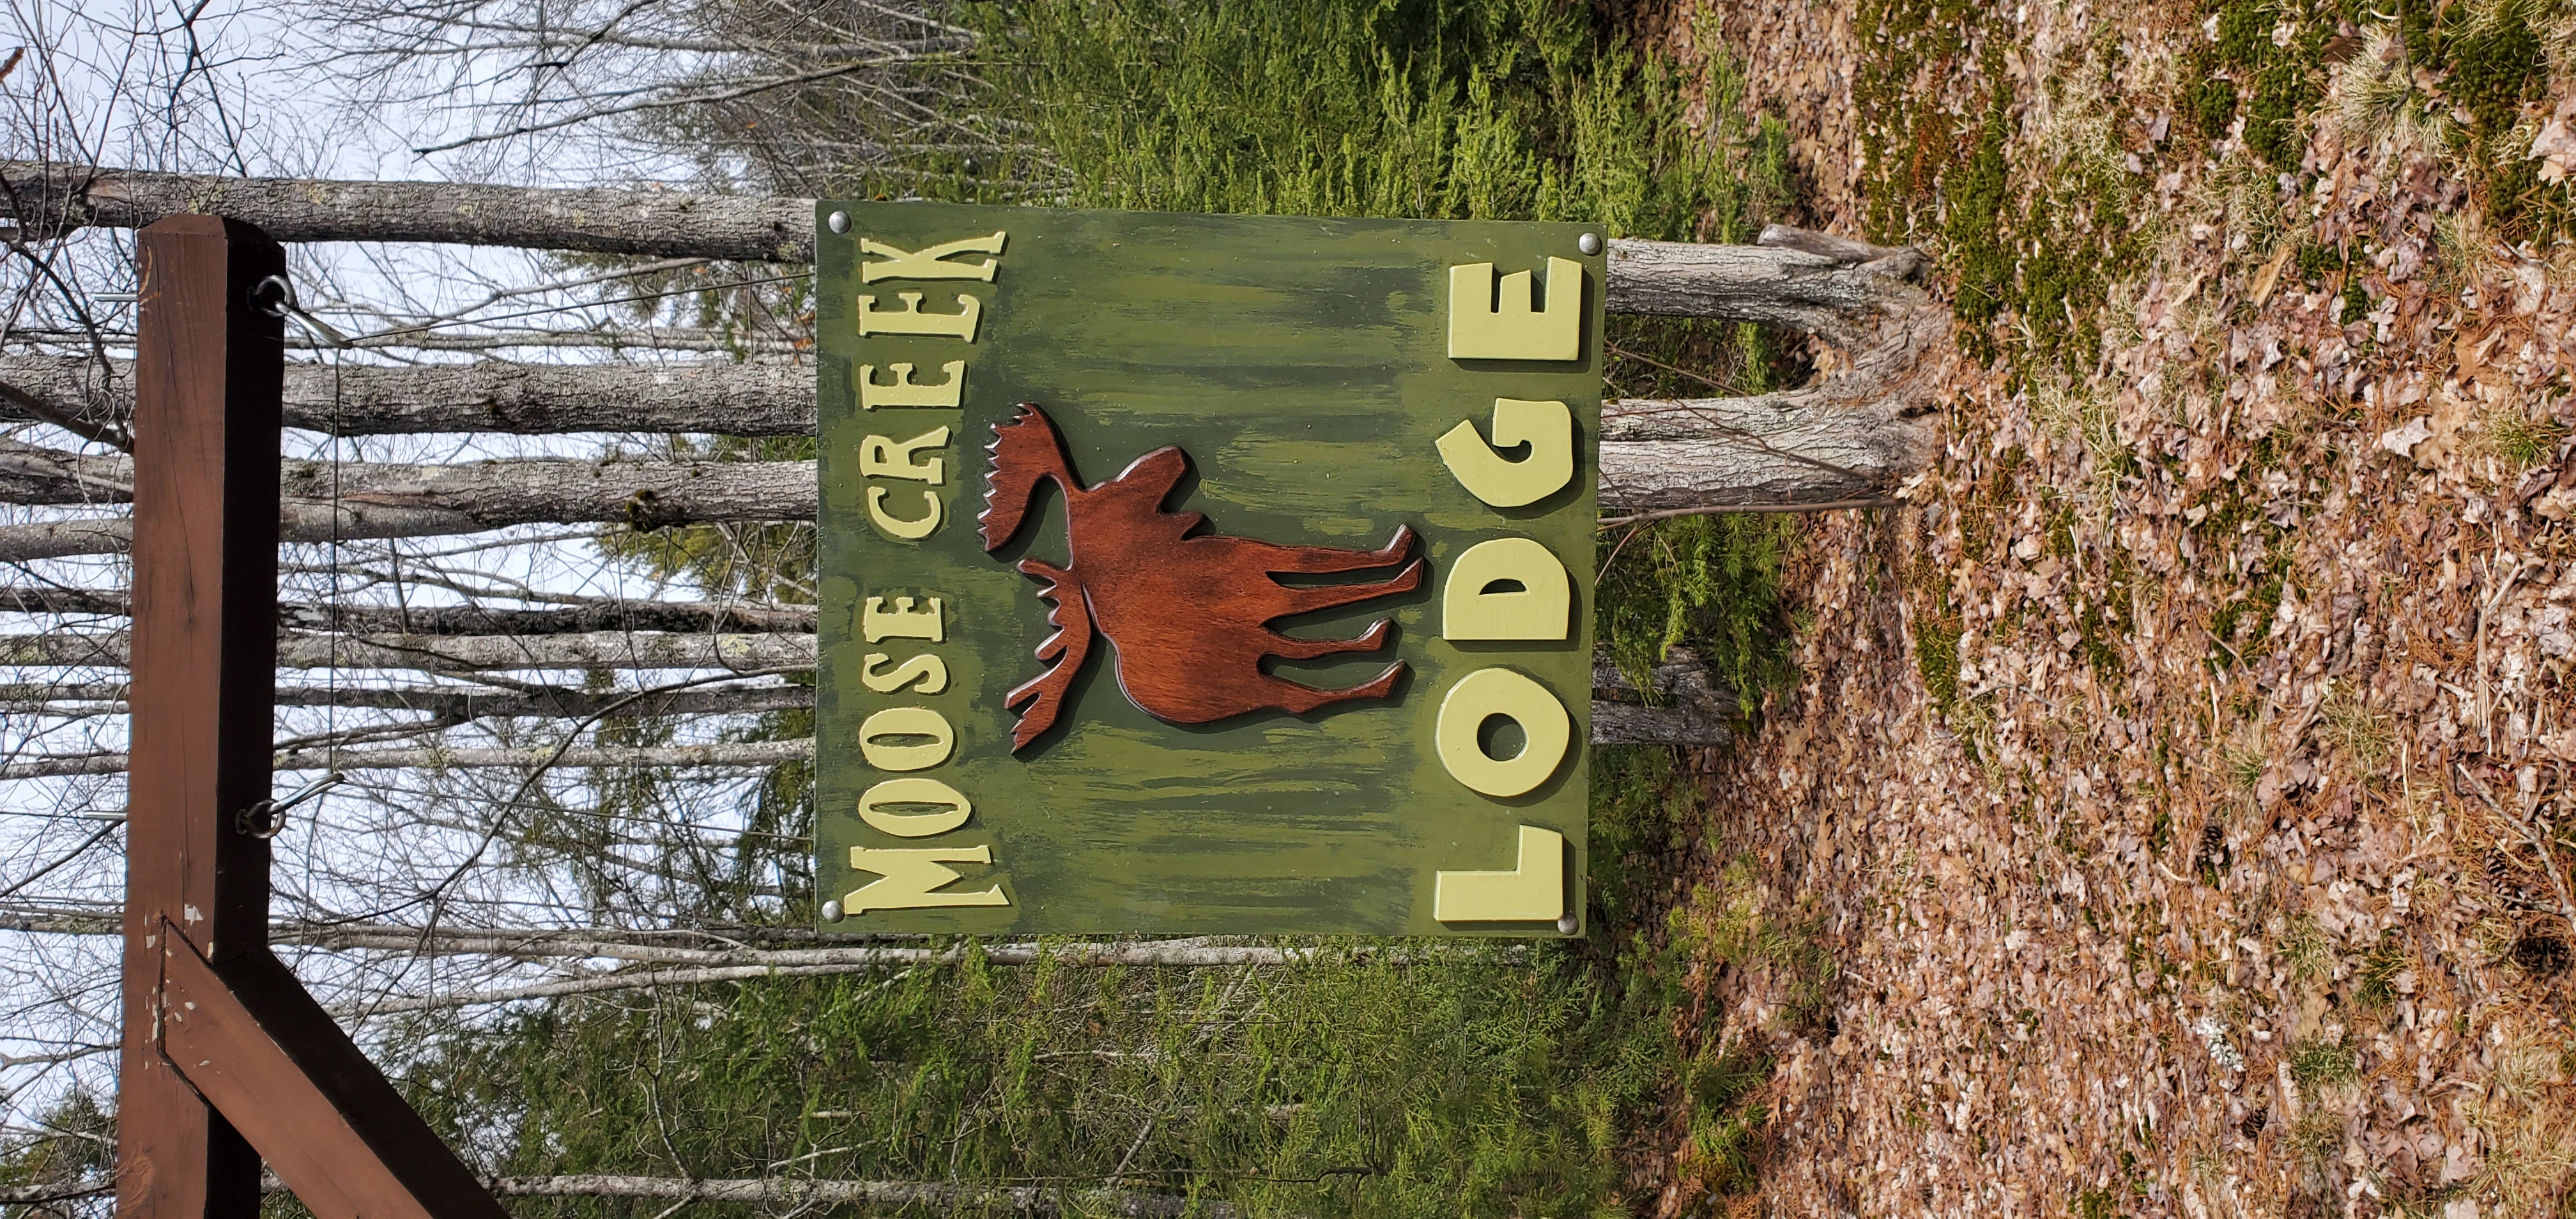 Moose Creek Lodge & Cabin - Guest suites for Rent in Scarborough